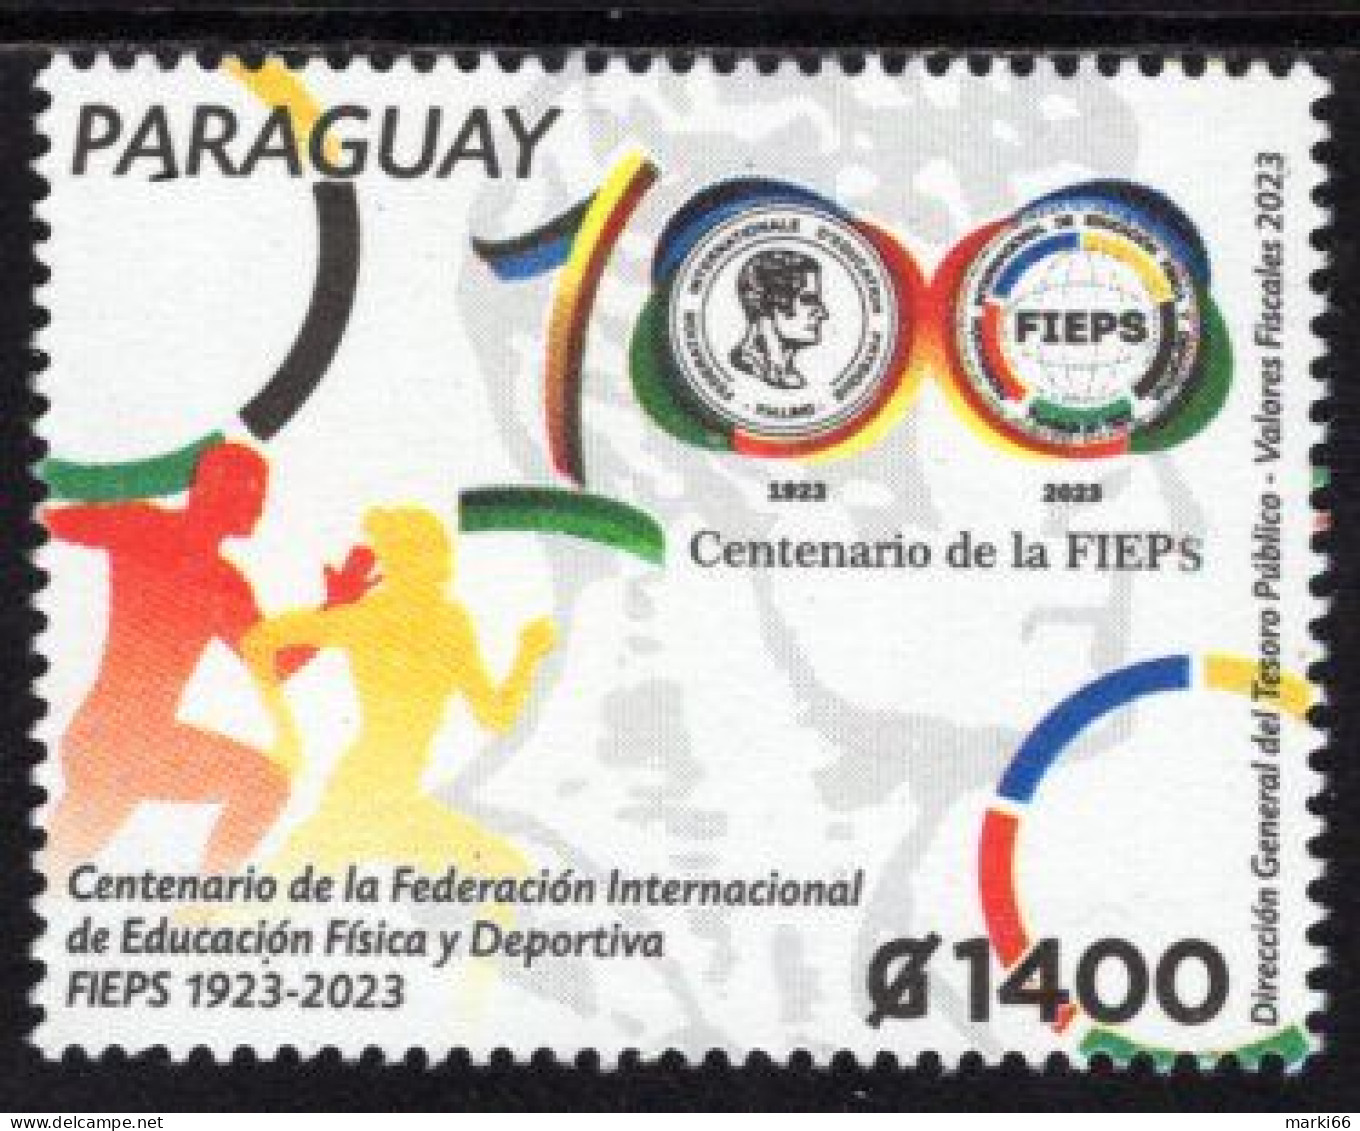 Paraguay - 2023 - Centenary Of International Federation Of Physical And Sports Education FIEPS - Mint Stamp - Paraguay